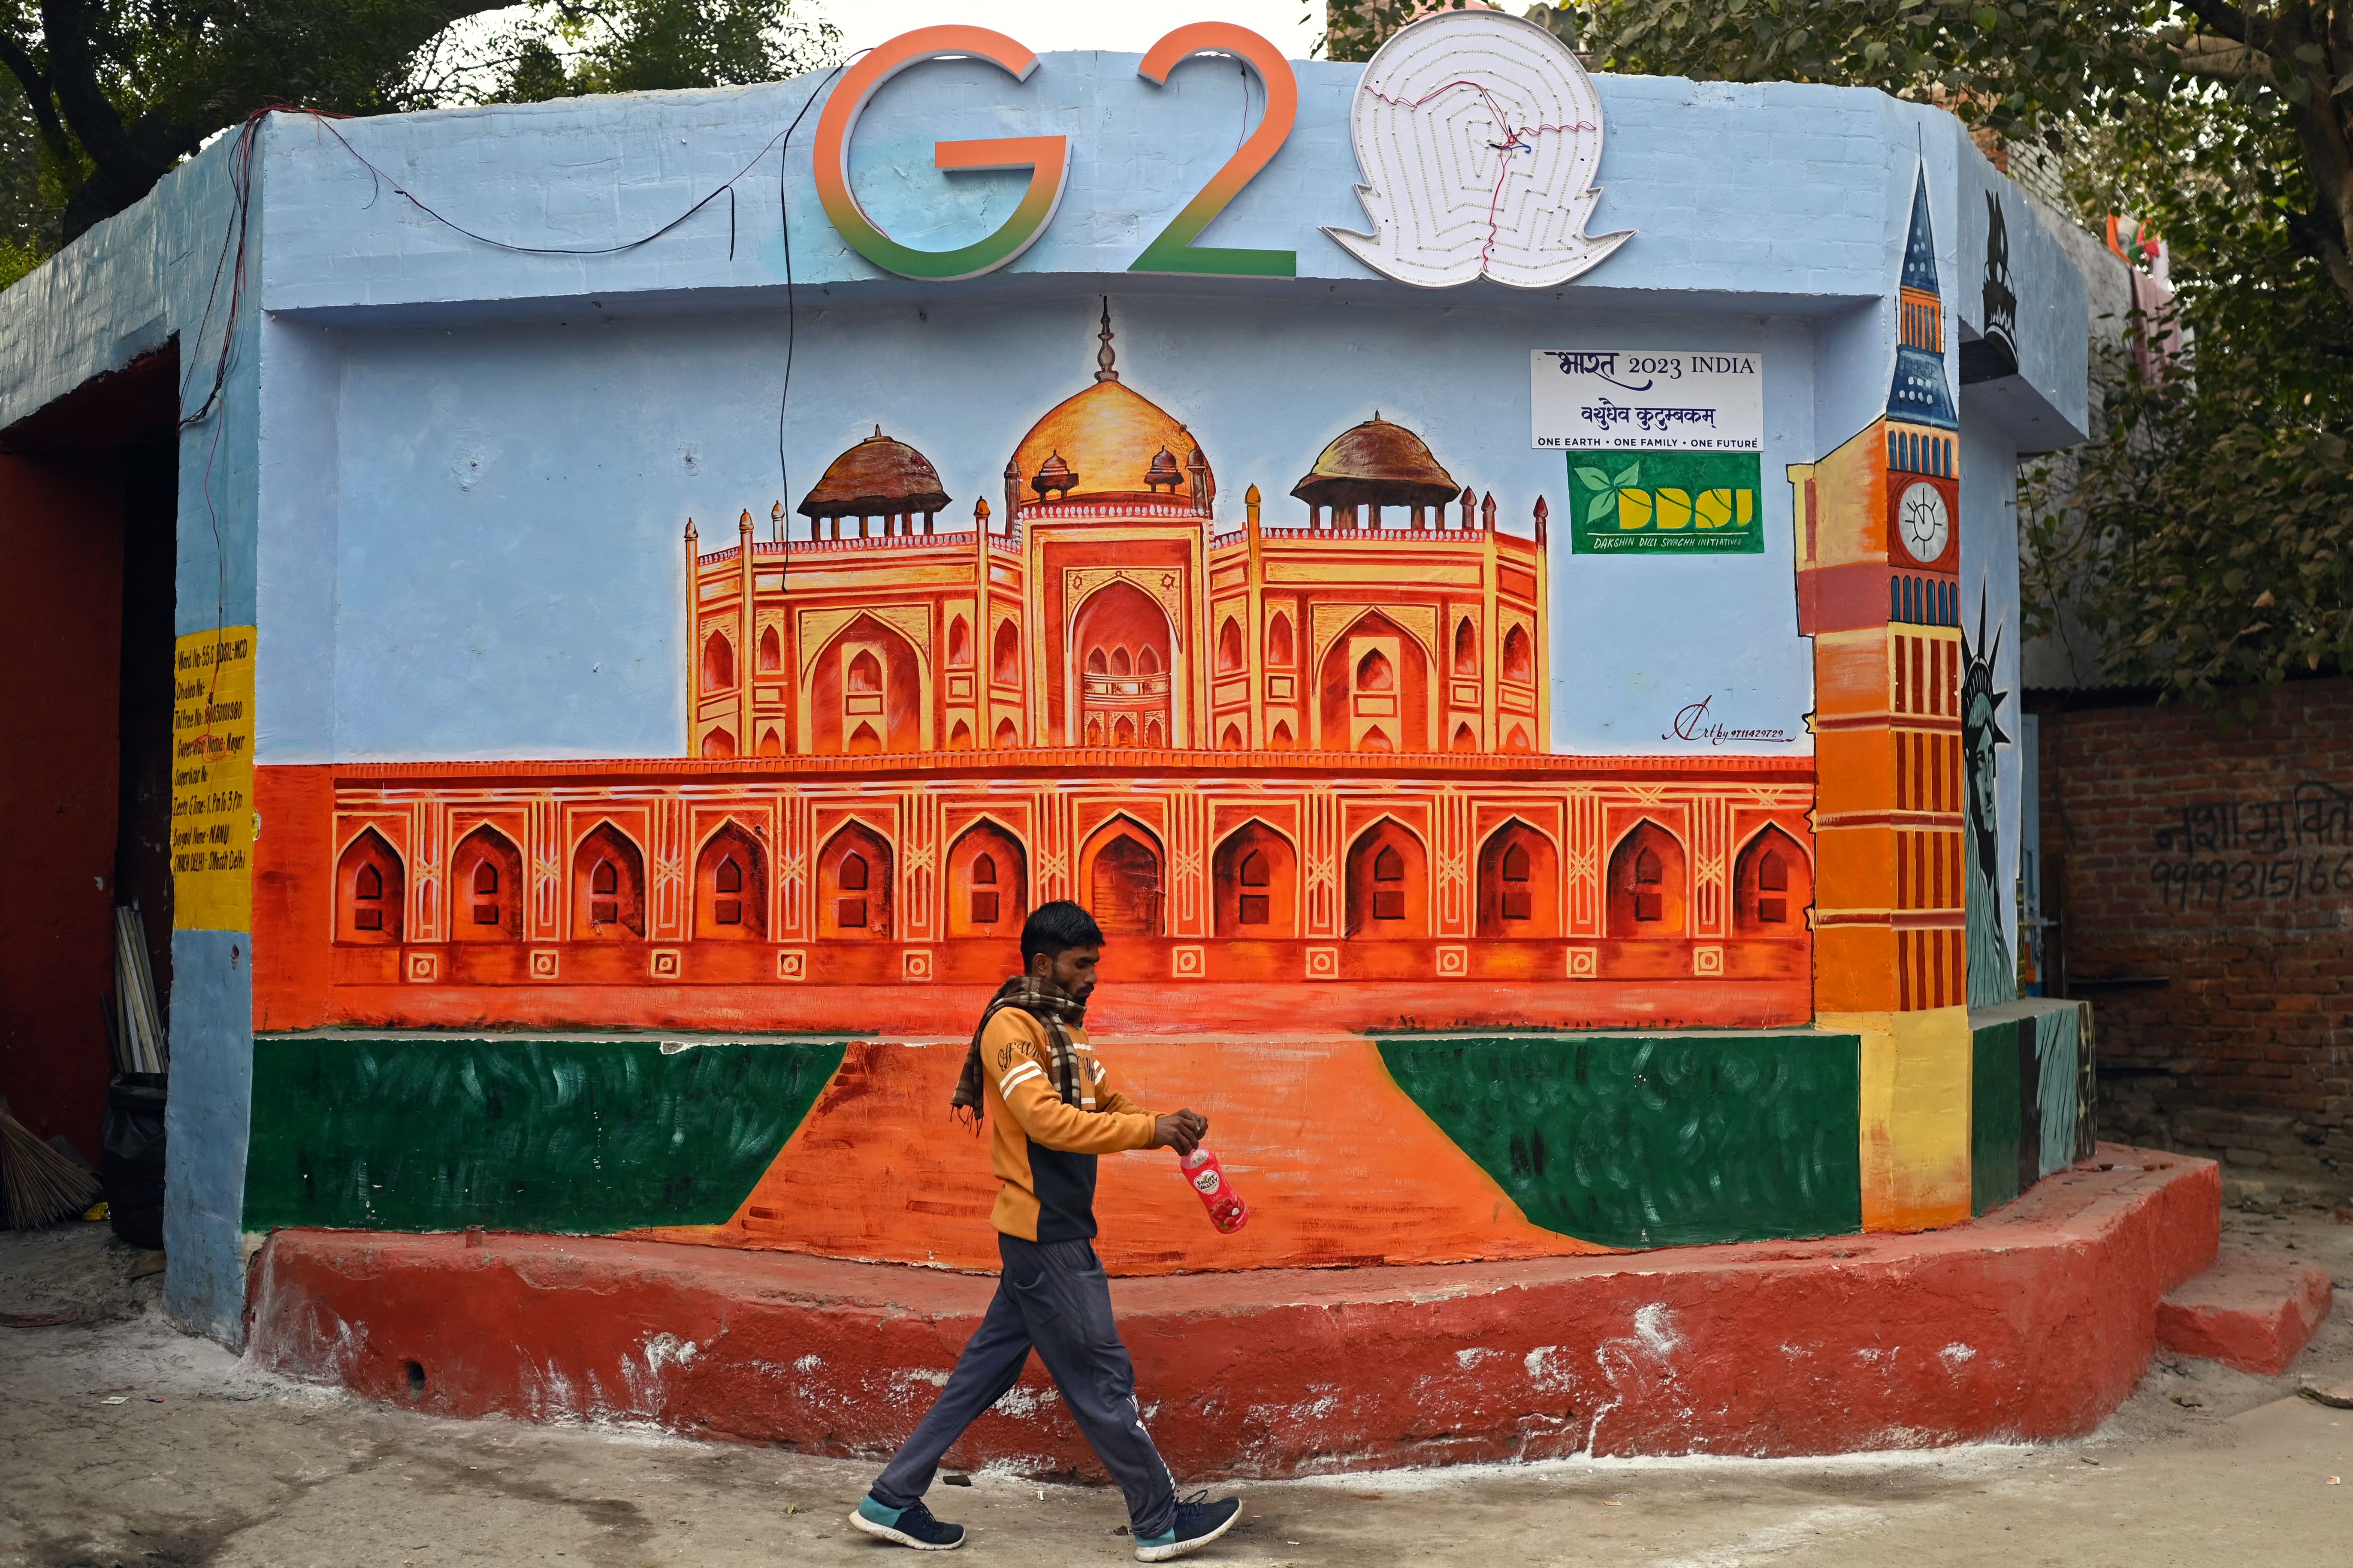 A man walks past a wall mural of Humayun’s tomb under the logo of G-20 Summit, in New Delhi